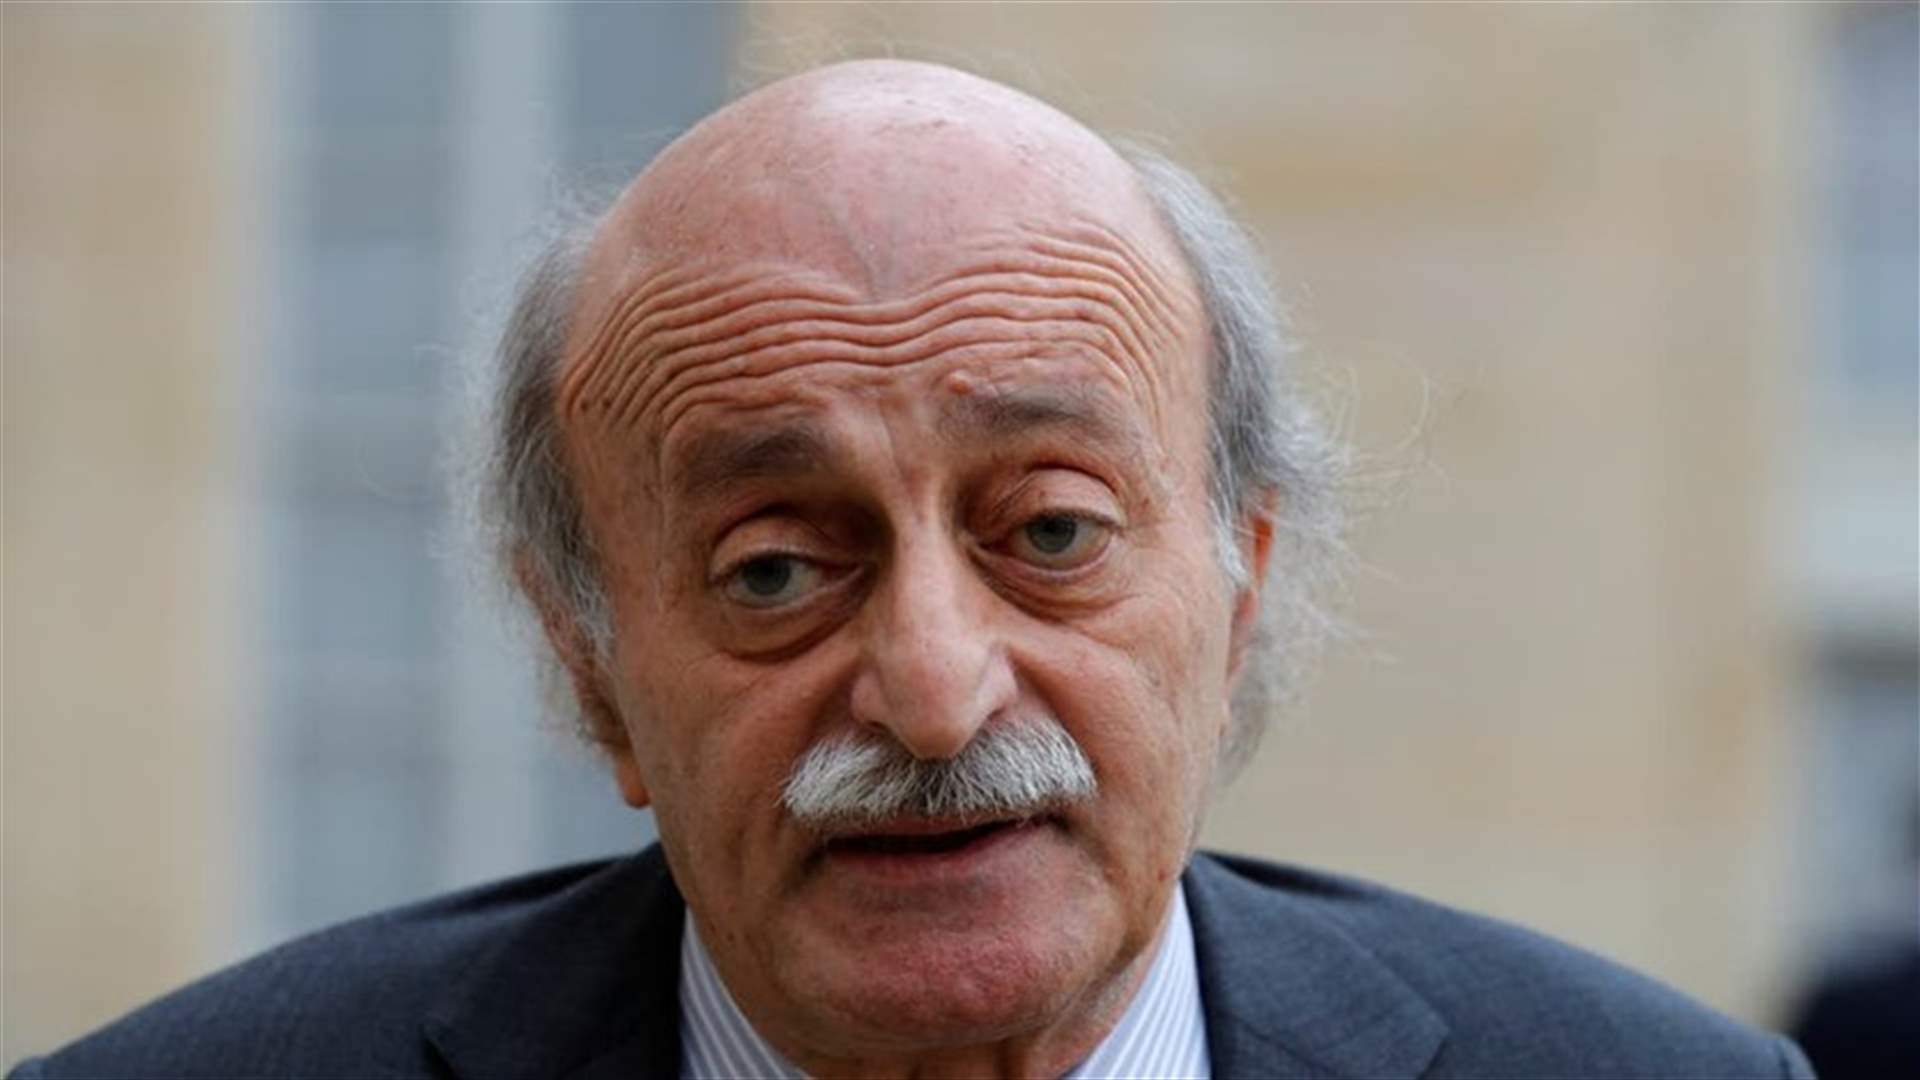 Jumblatt Warns Against Catastrophic Attempt to Displace Gaza Population and Undermining Palestinian Cause